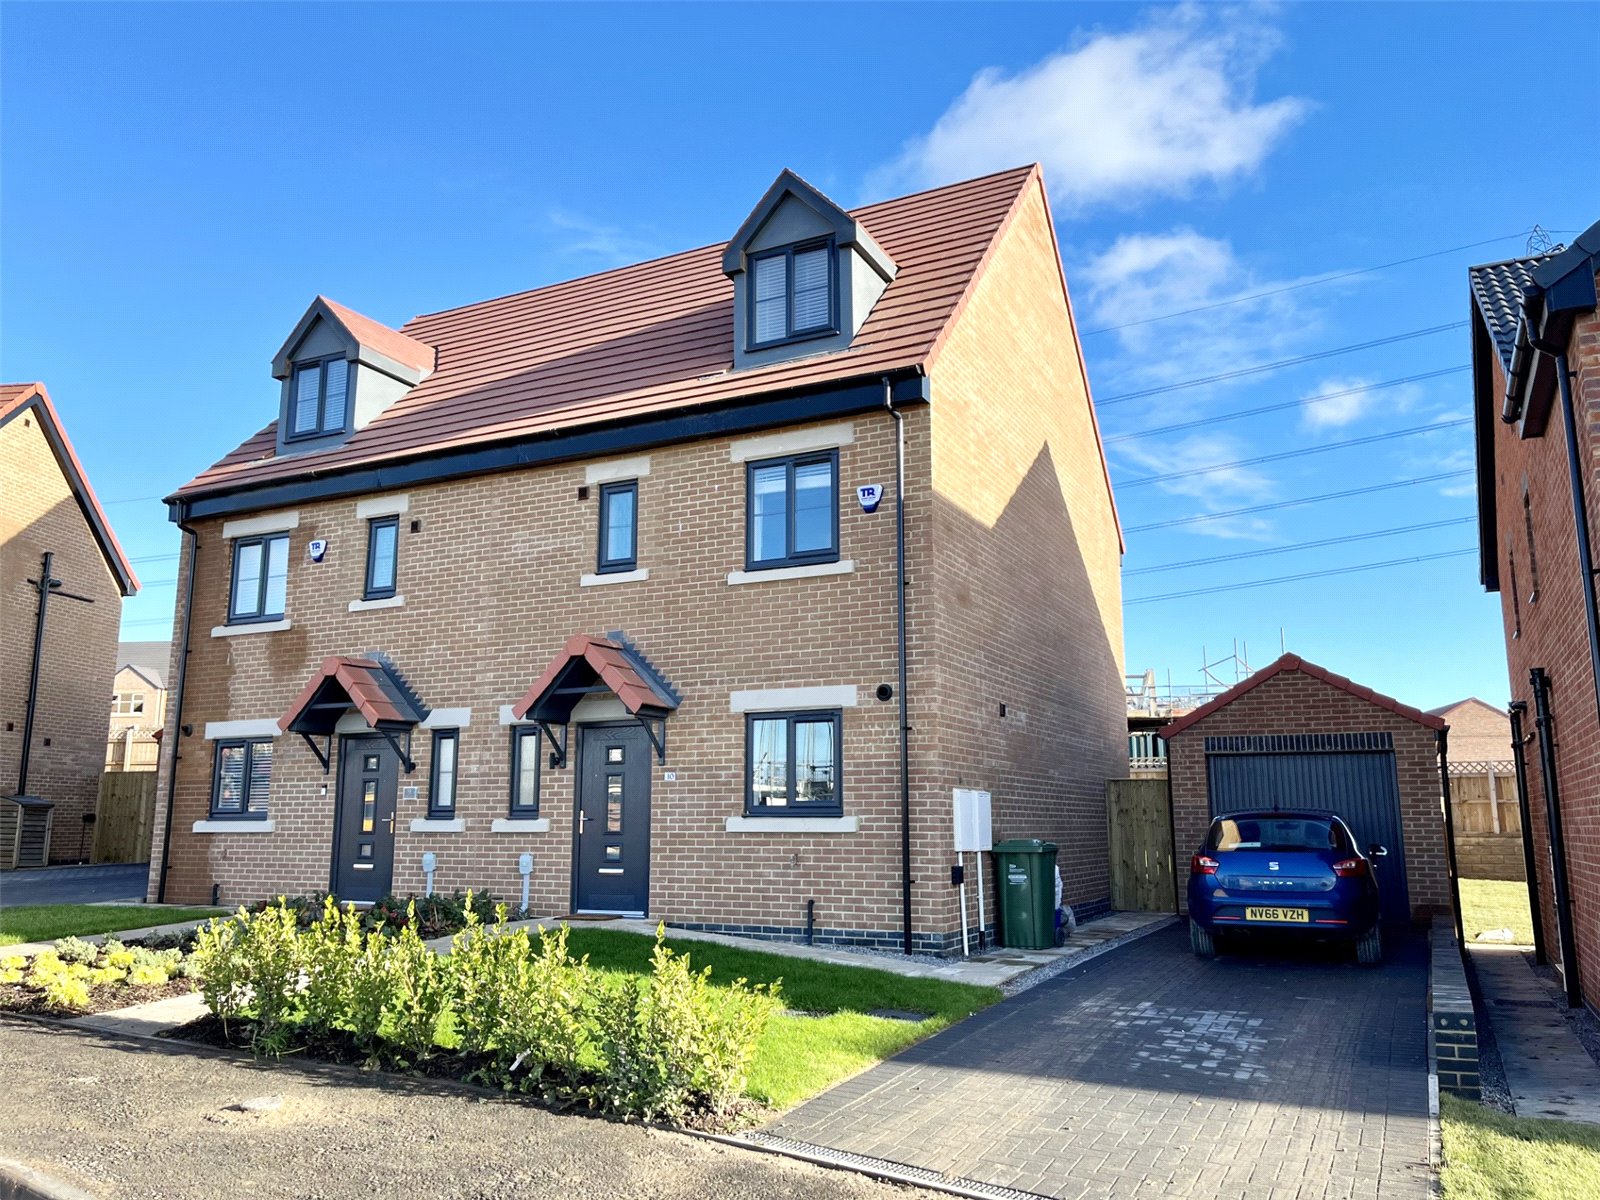 4 bed house for sale in Horsely Way, Eaglescliffe 1